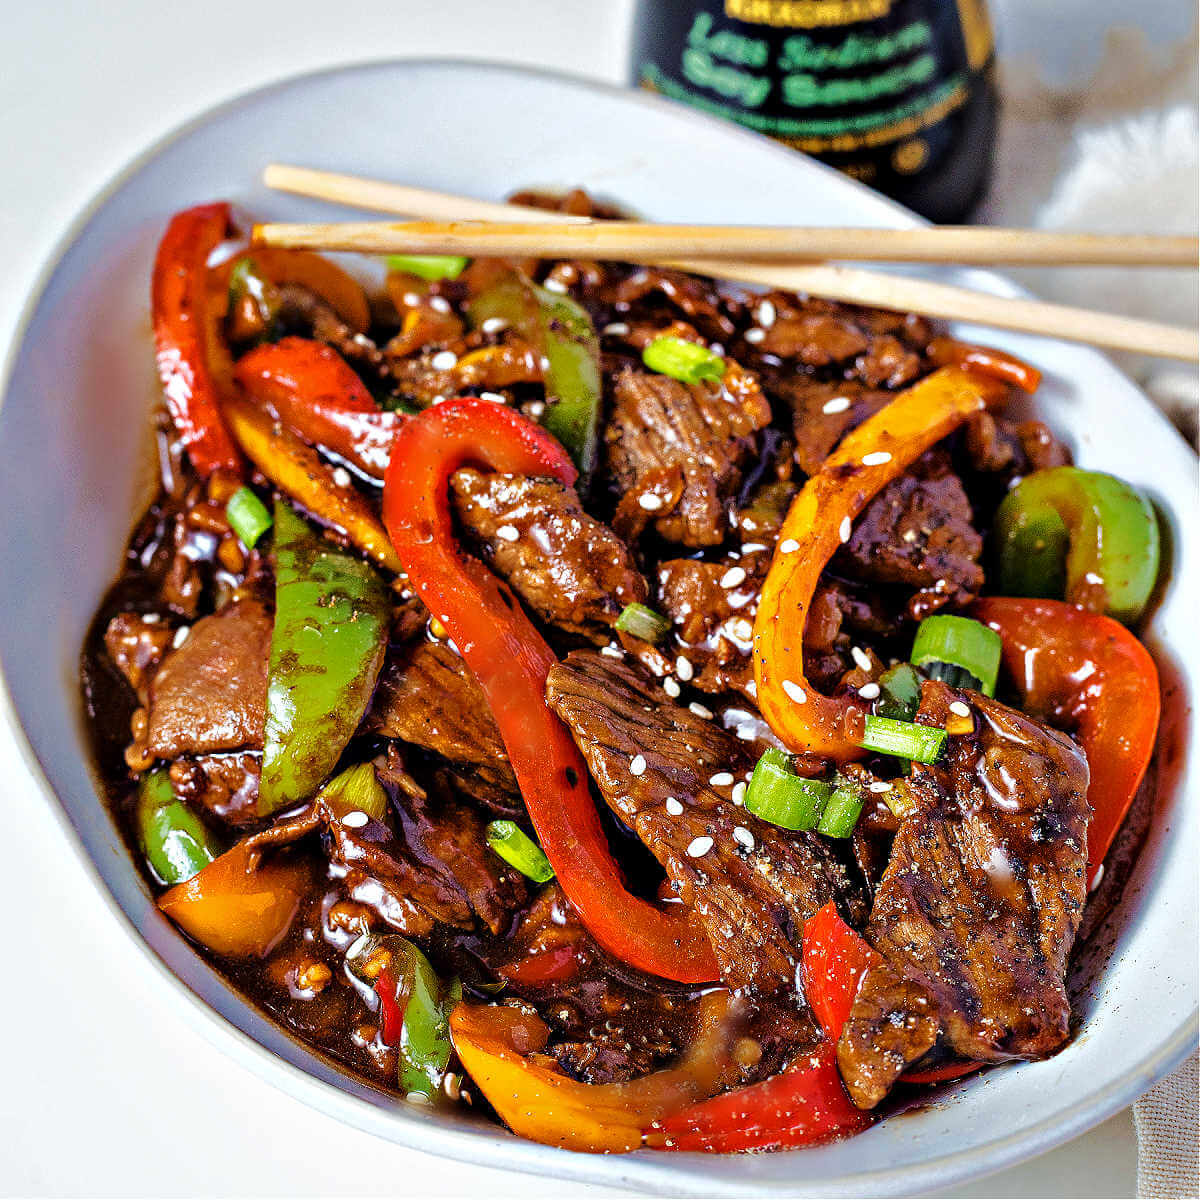 Best Steak for Stir Fry: Choosing the Perfect Cut for Your Dish